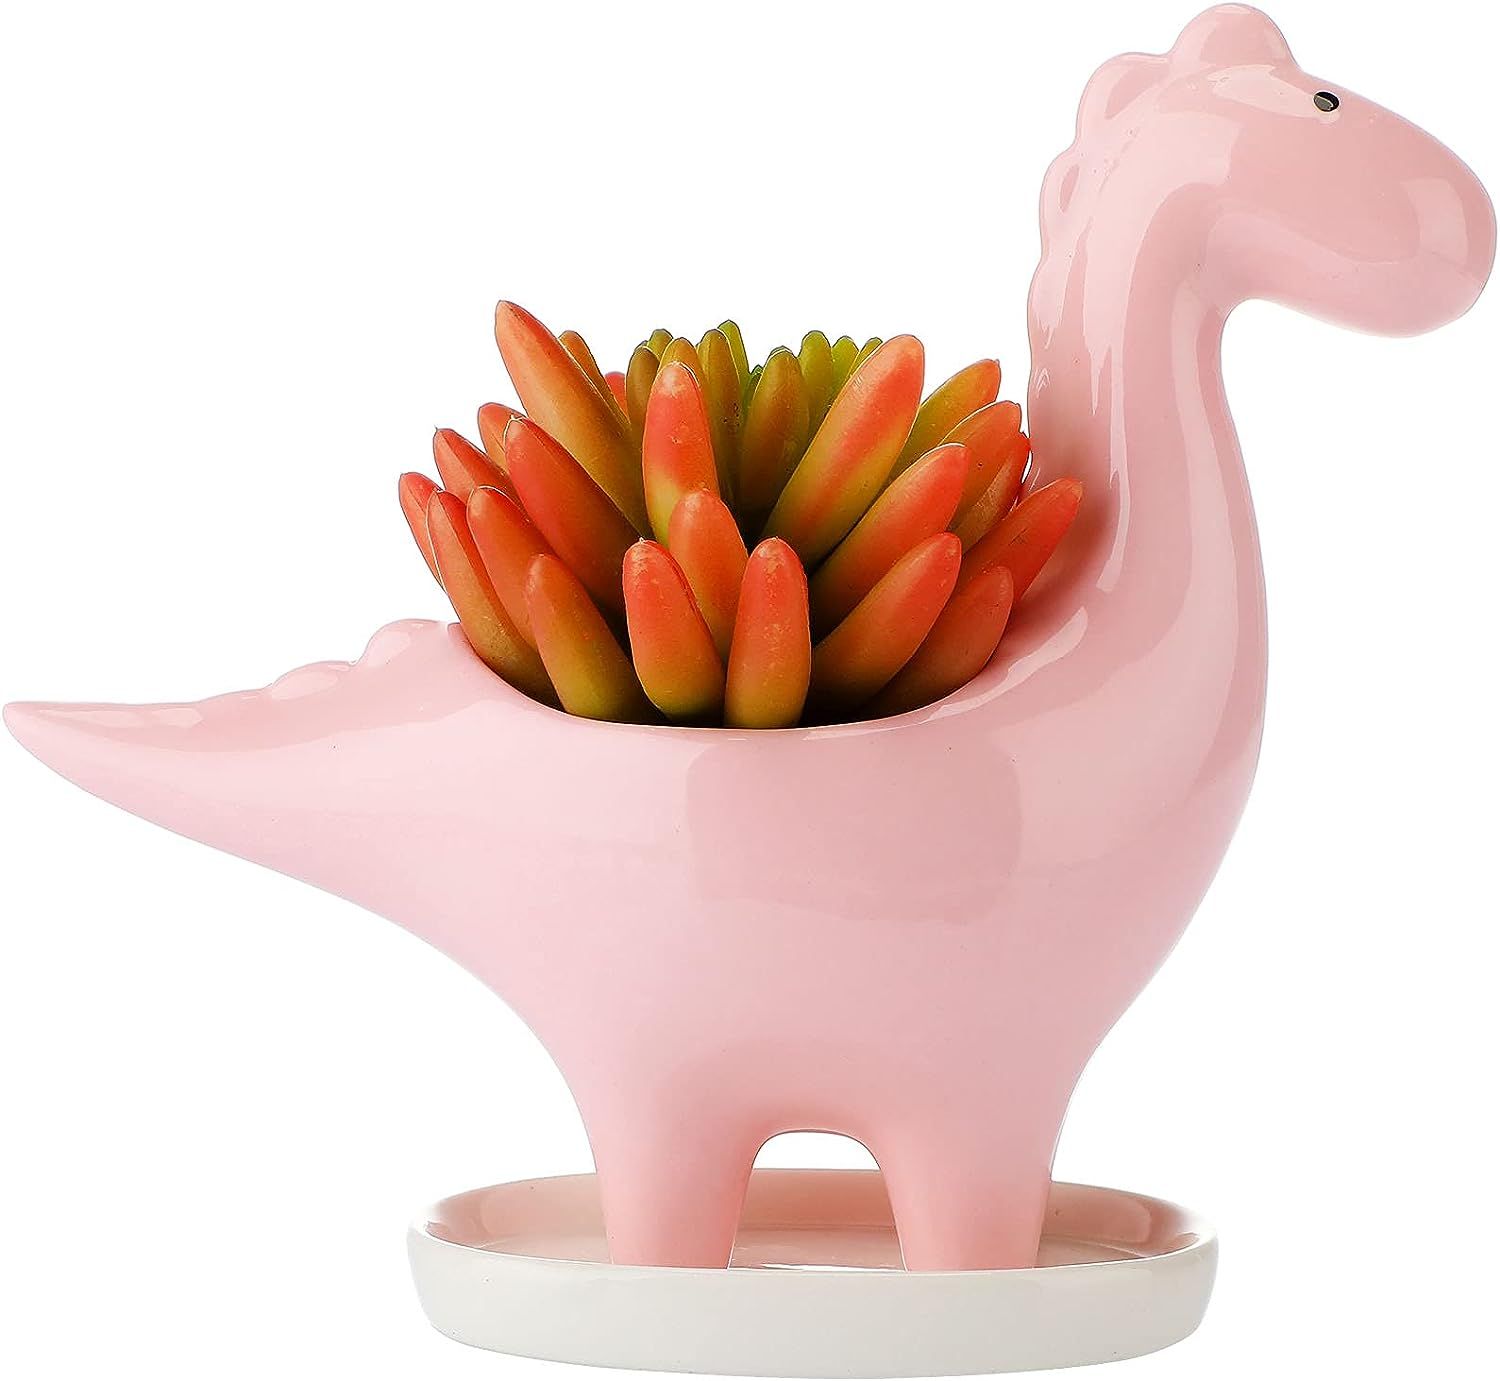 Dinosaur Succulent Pots, Fleshy Ceramic Planter, Creative Animal Planter with Drainage Hole and Tray for Home Gardening Supplies (Pink, Elegant Style)